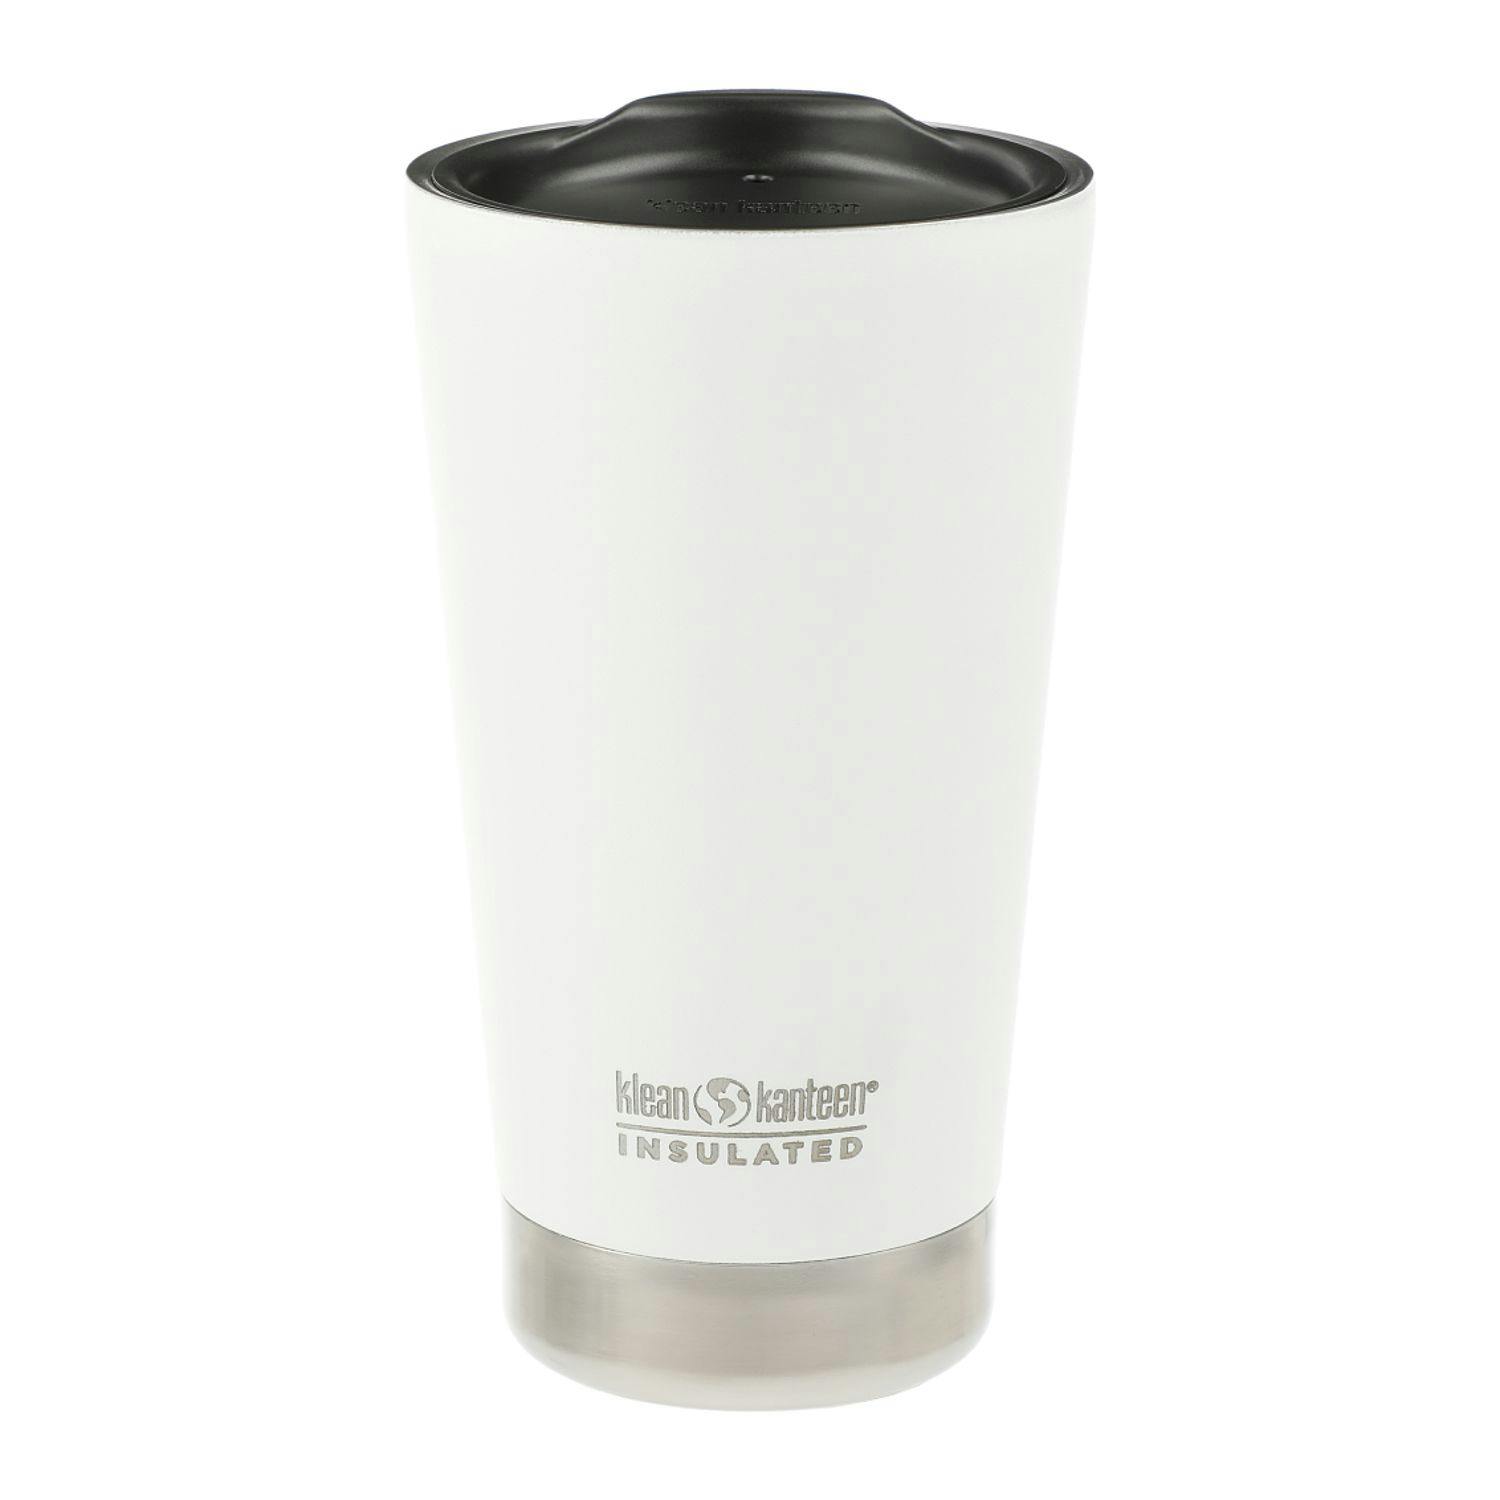 Klean Kanteen Eco Insulated Tumbler 16oz - additional Image 2